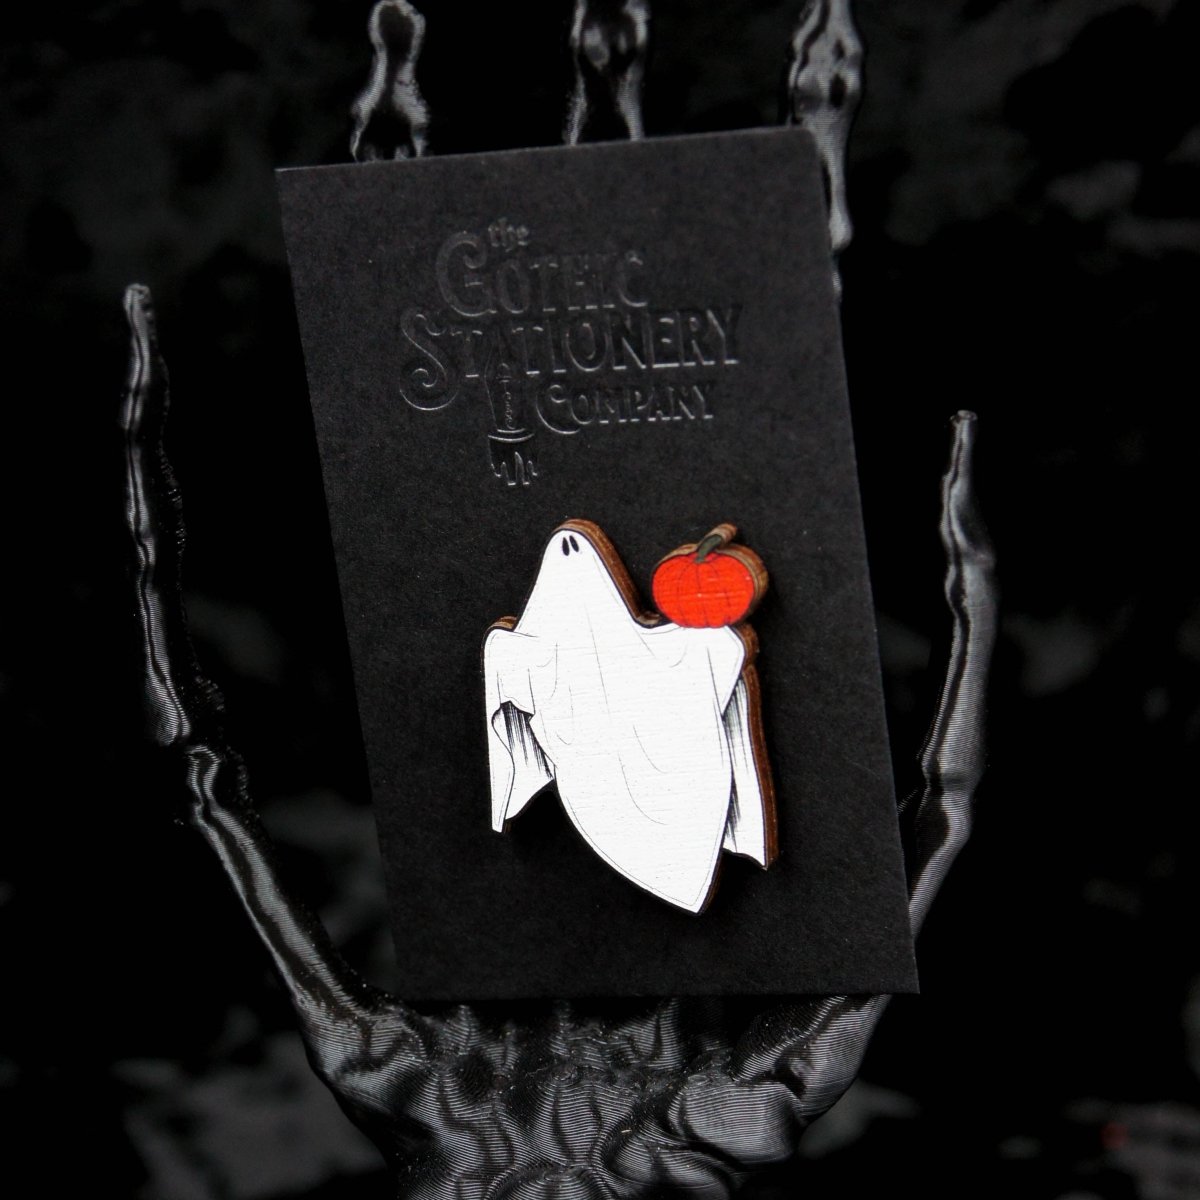 Pumpkin Ghost Wooden Pin Badge | Halloween Badge - The Gothic Stationery Company - Wooden Pin